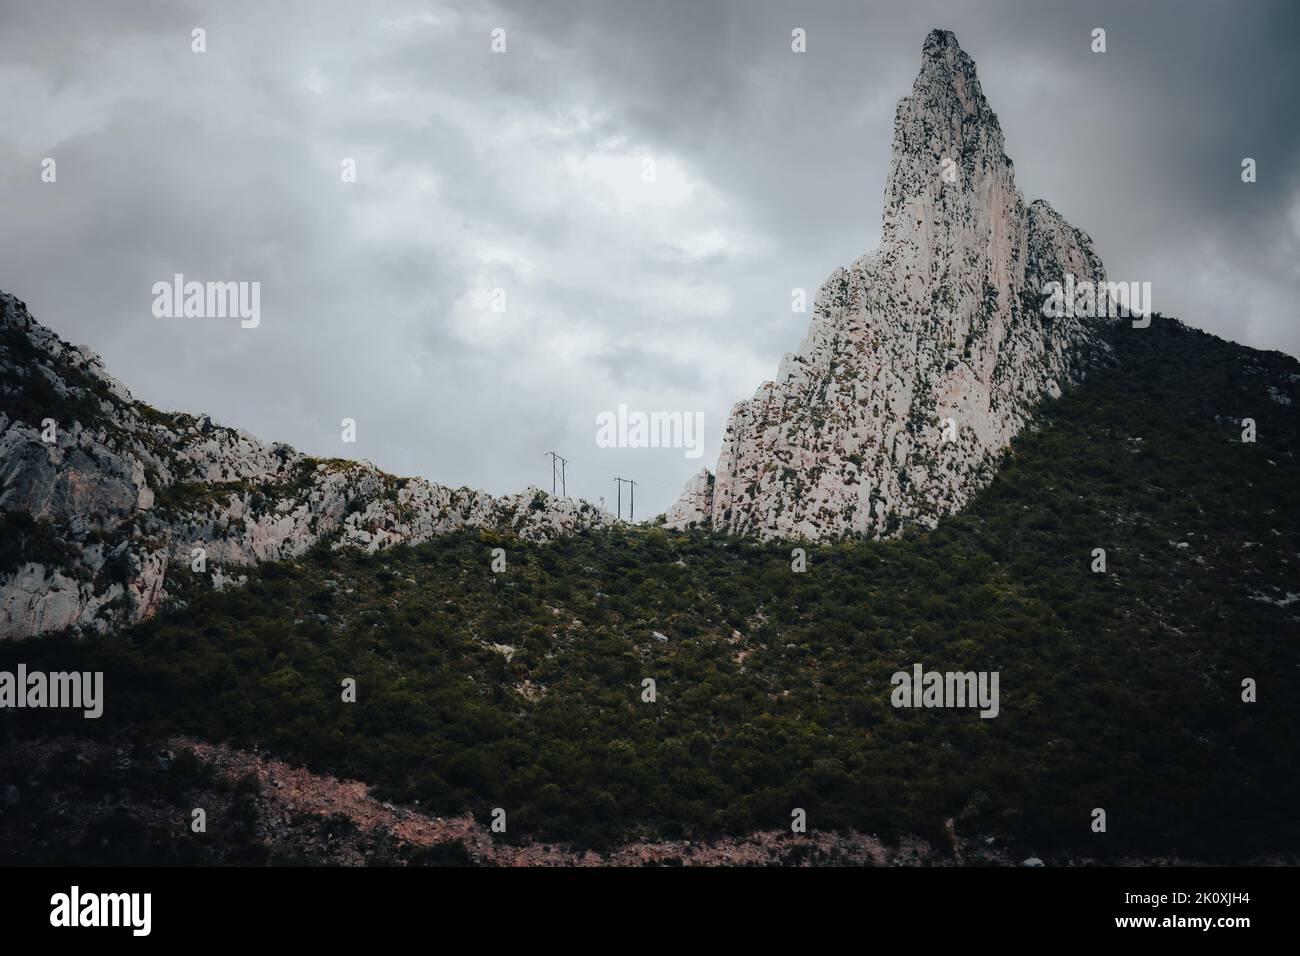 A beautiful shot of a mountain at La Huasteca national park against a gray cloudy sky Stock Photo